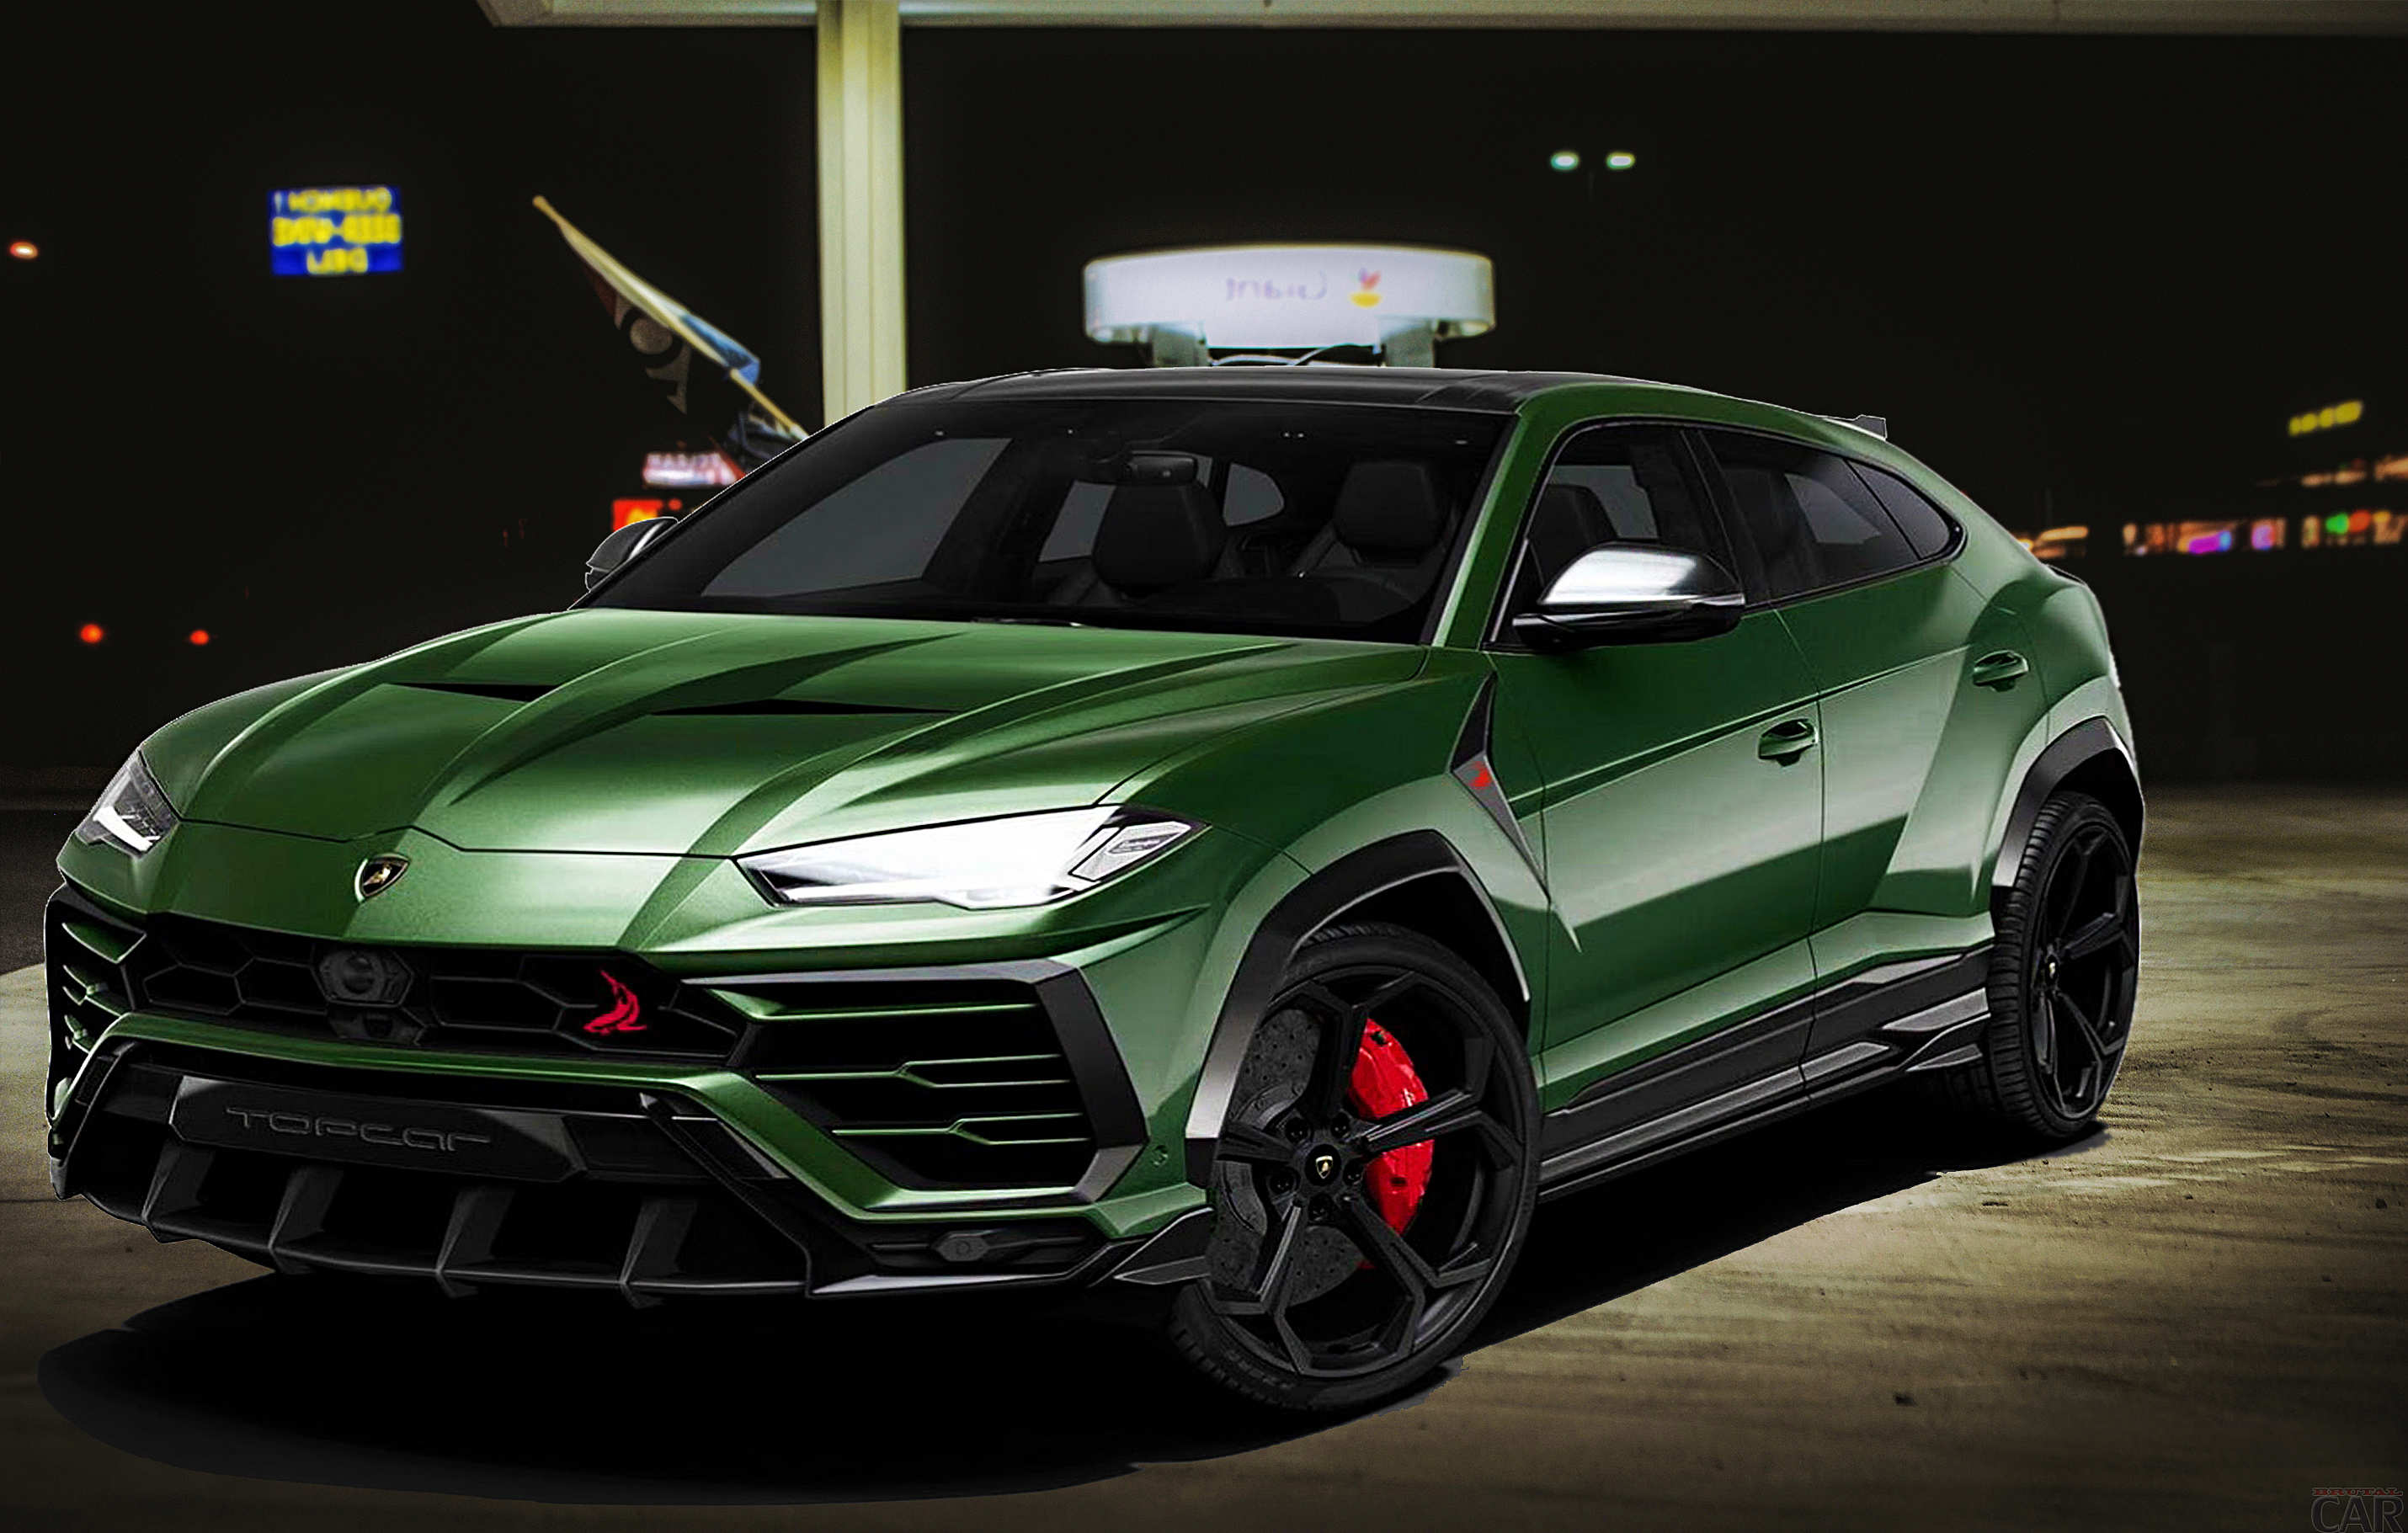 Free download Lamborghini Urus wallpapers hd download for Watch for